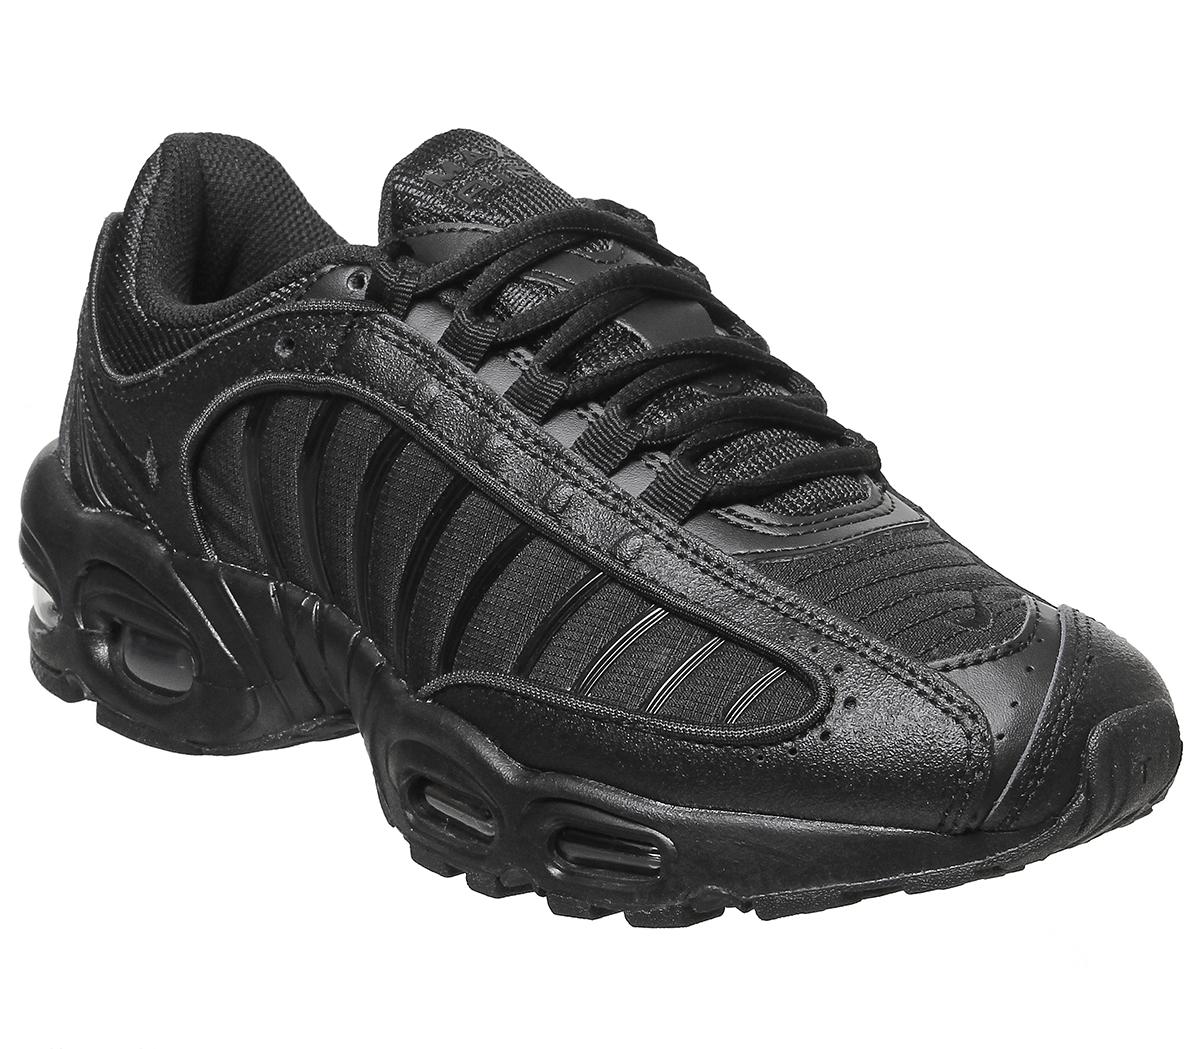 air max tailwind 4 trainers